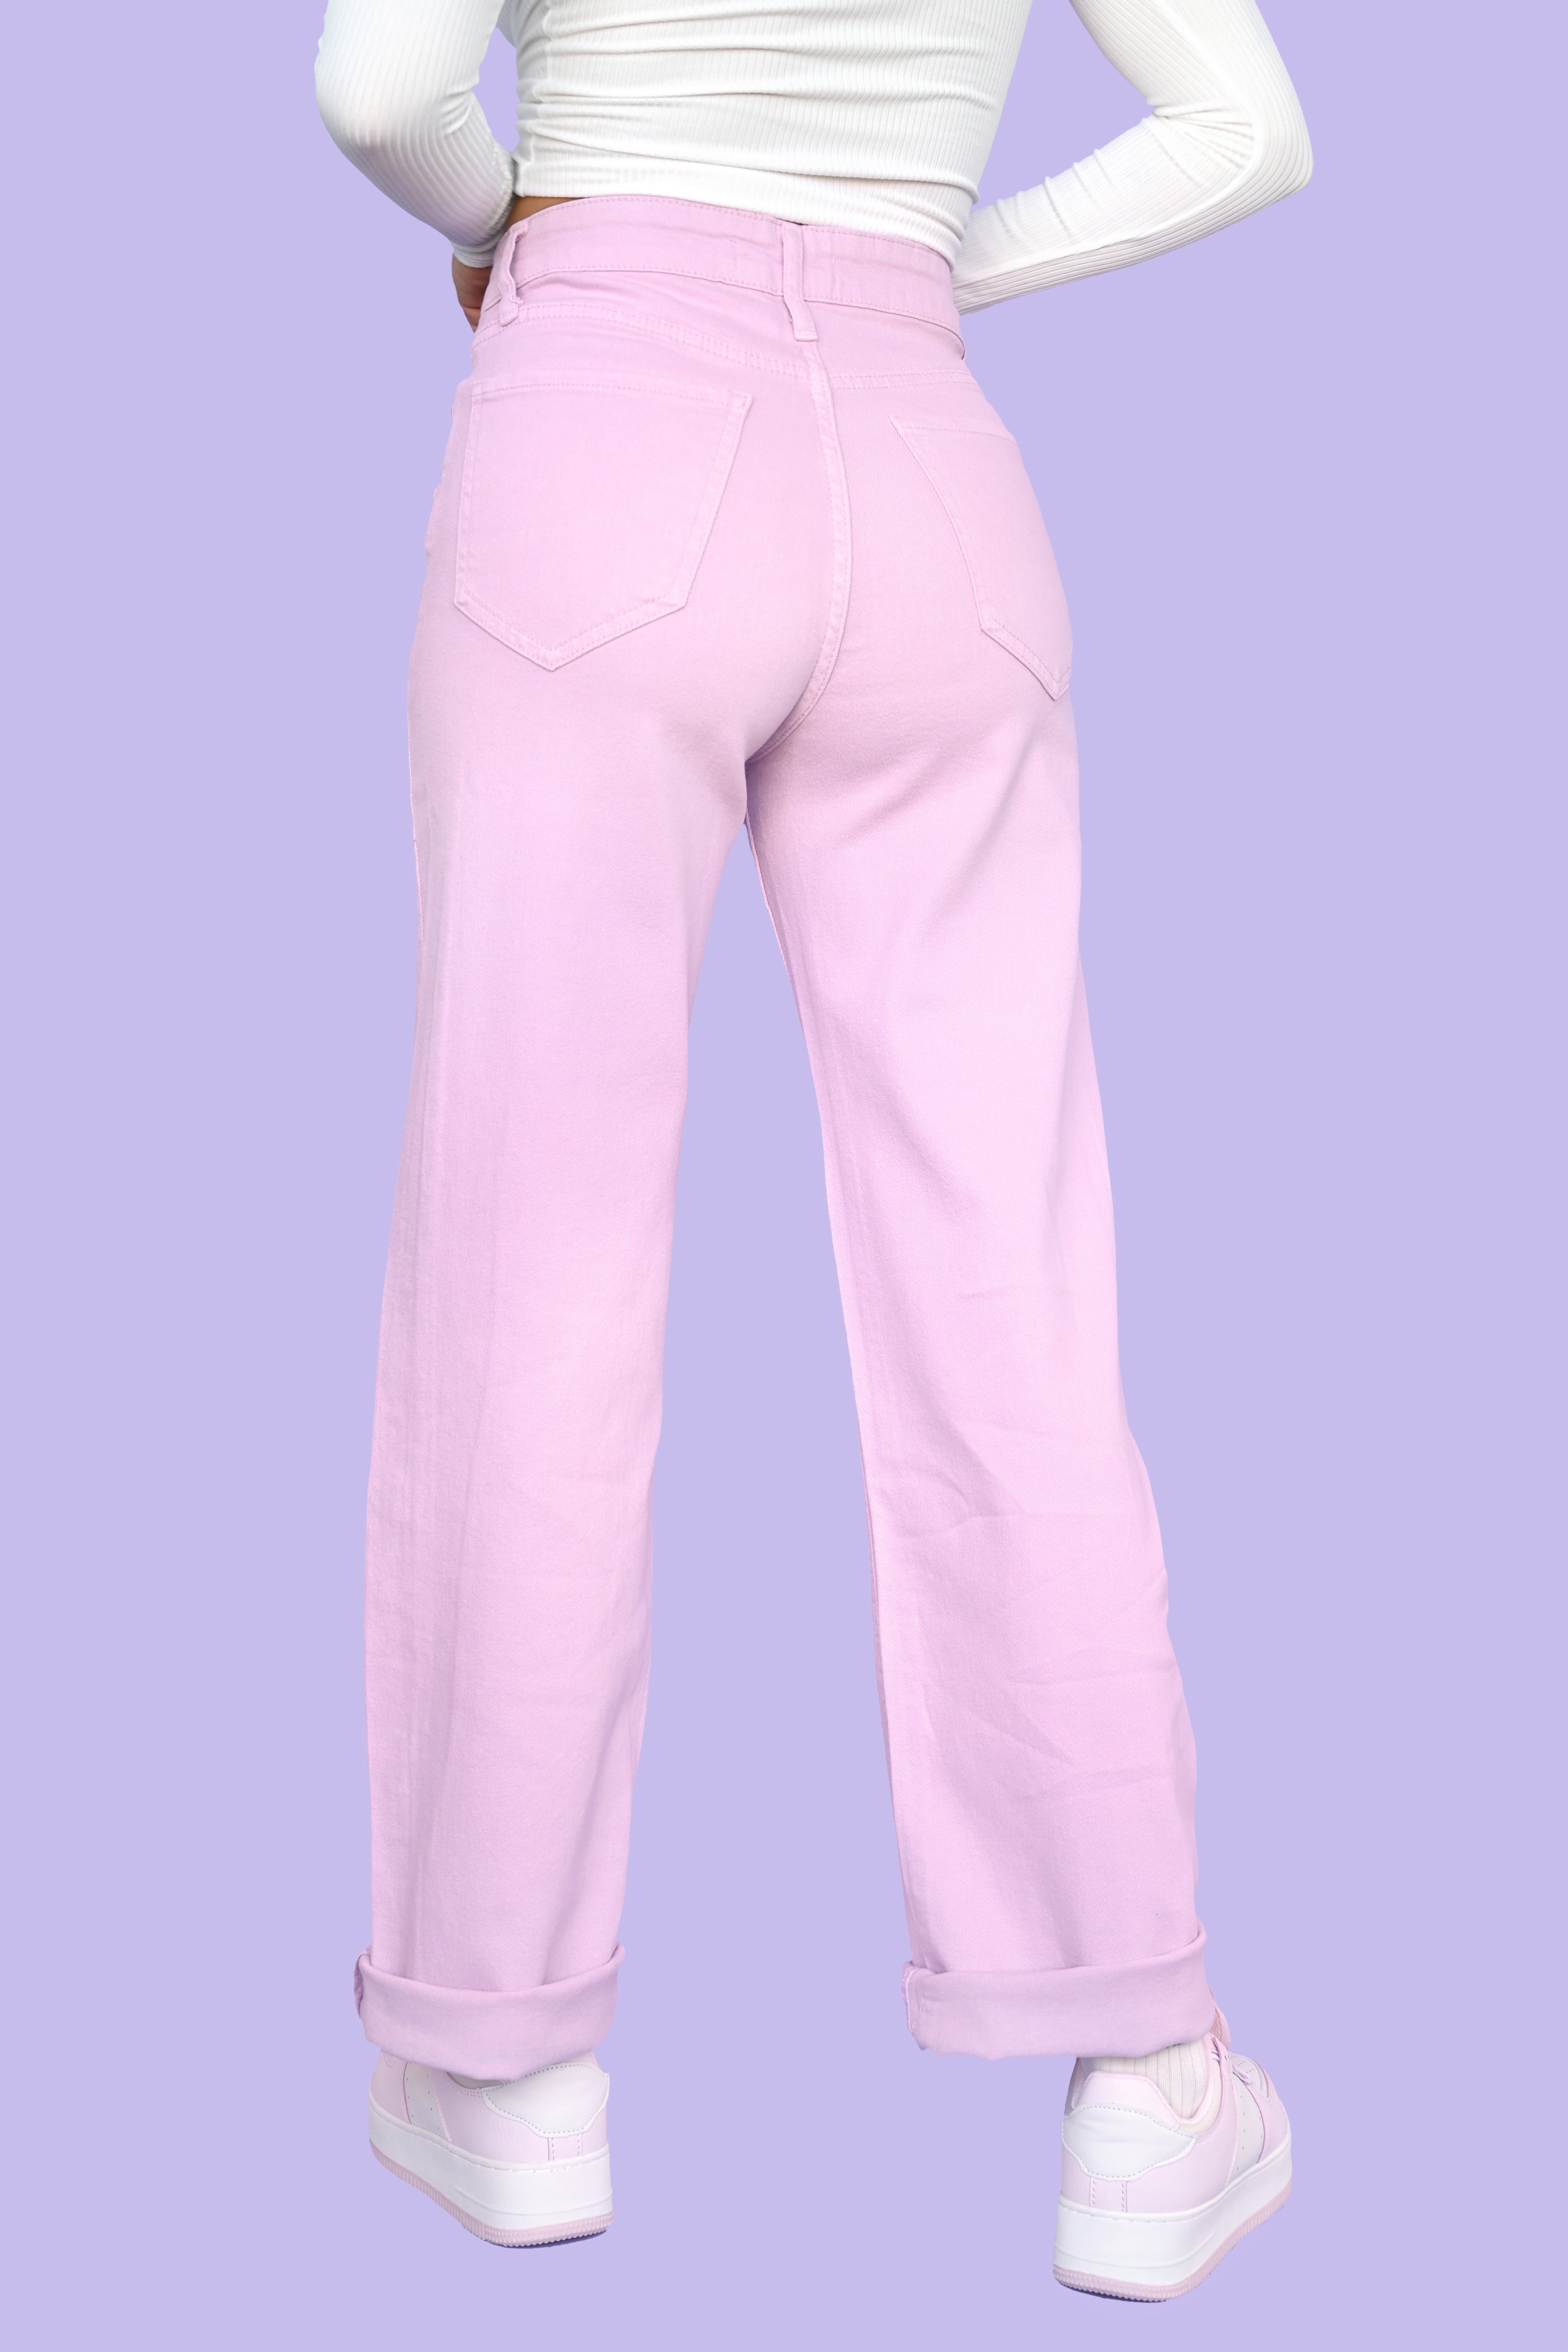 lilac - High waisted, 90's straight leg fit. Slouchy and oversized but regular in the waist. Slight stretch. Durable denim. back view